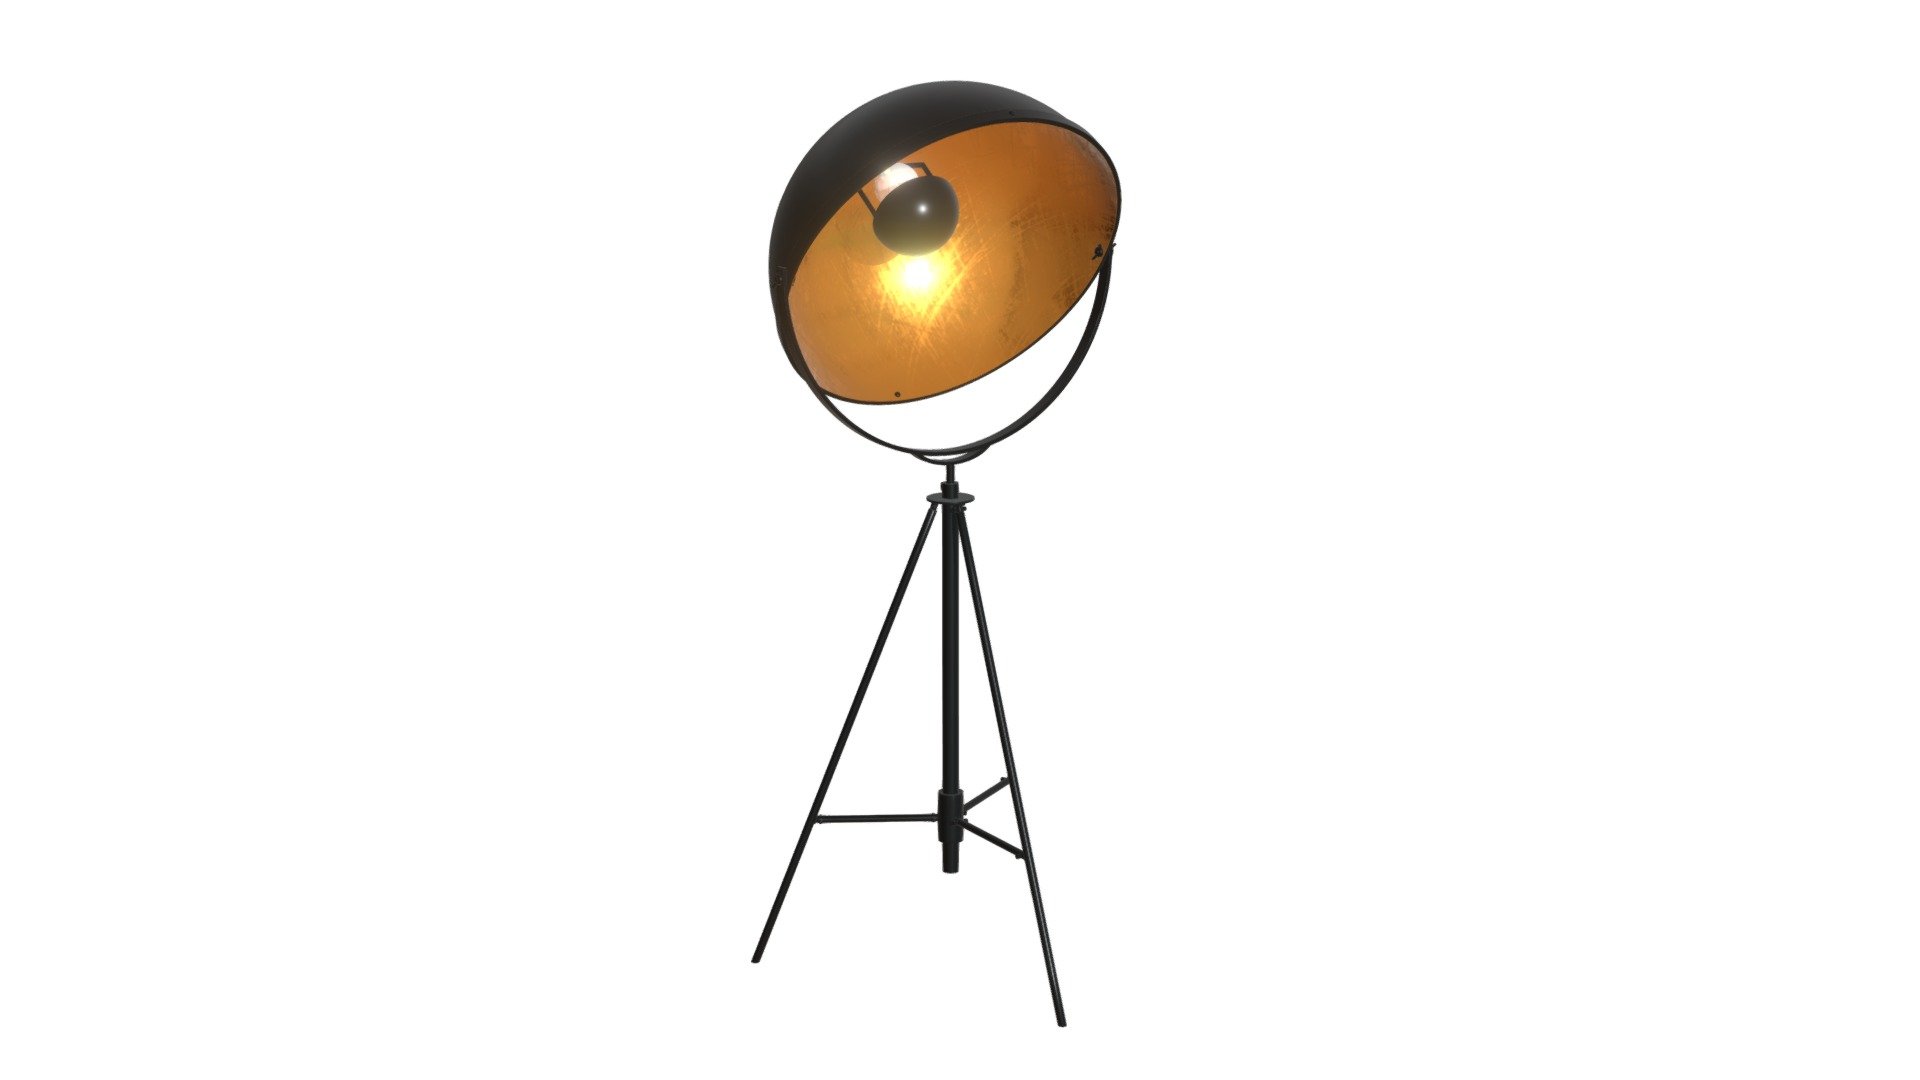 https://zuomod.com/vauxhall-floor-lamp-antique-black

Reminiscent of vintage stage lighting, this dramatic half dome lamp in black metal with it’s striking antique brass interior directs light wherever you need it. A gorgeous addition to a living room, office, or loft space. Adjustable tripod base measures from 63” up to 80.3” in height 3d model